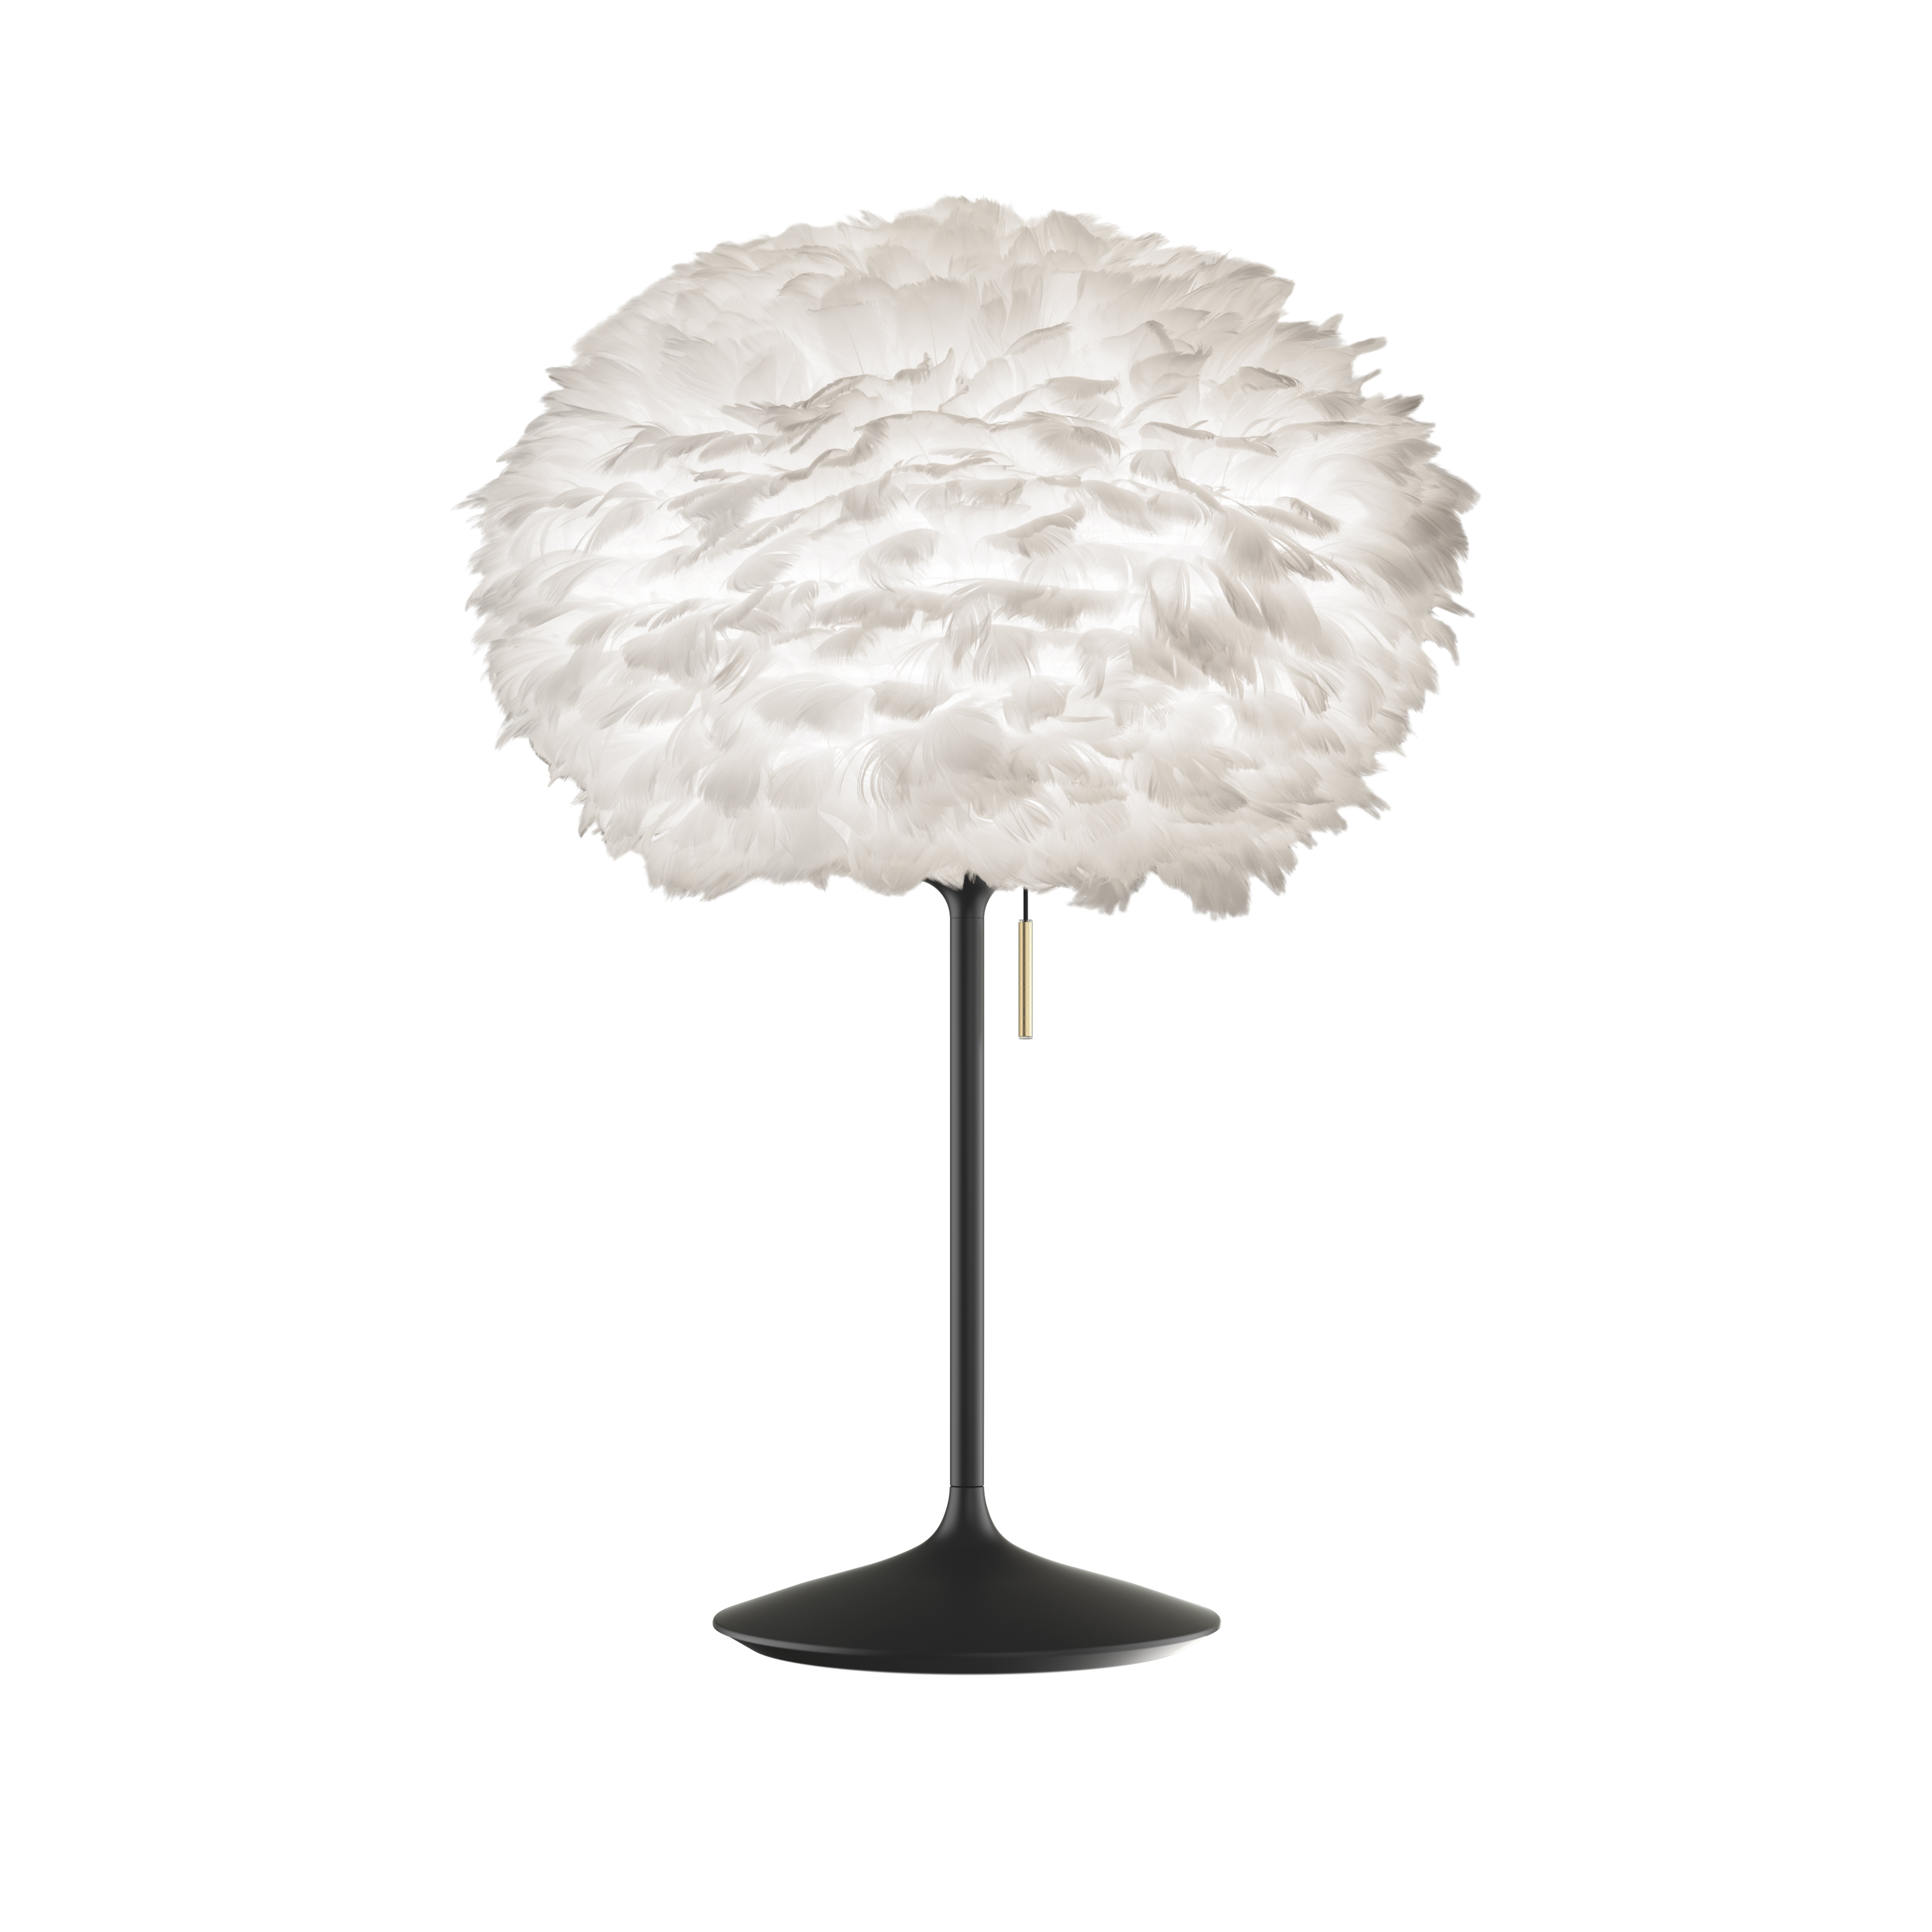 UMAGE Medium White Feather Eos Table Lamp with Black Santé Stand